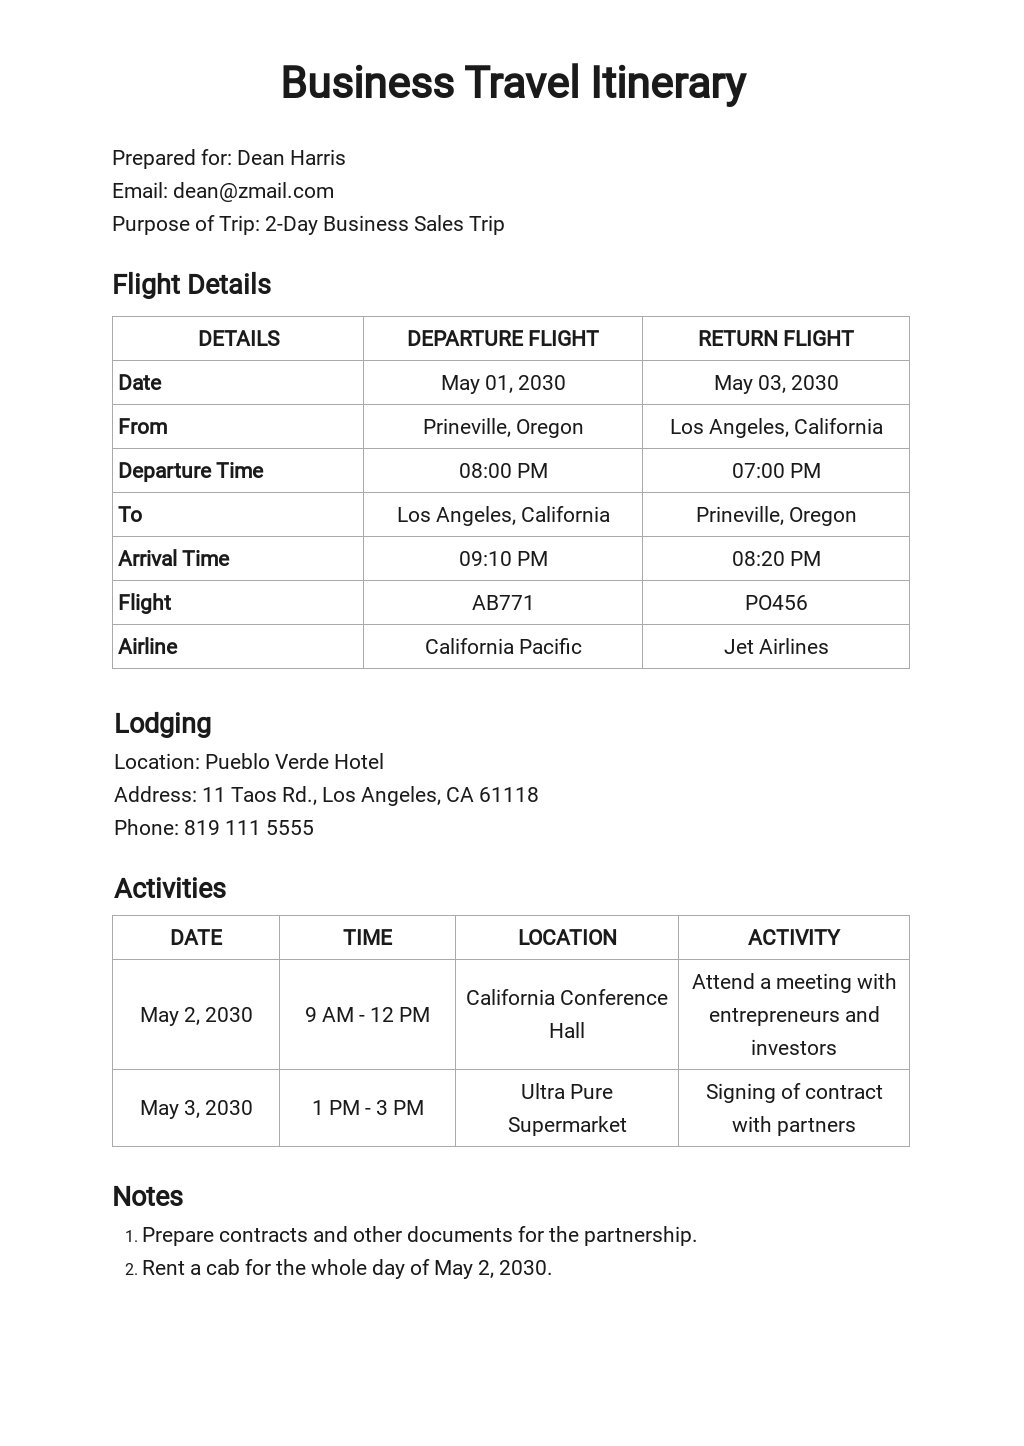 Business Travel Itinerary Template - Google Docs, Word  Template.net With Regard To Business Travel Proposal Template